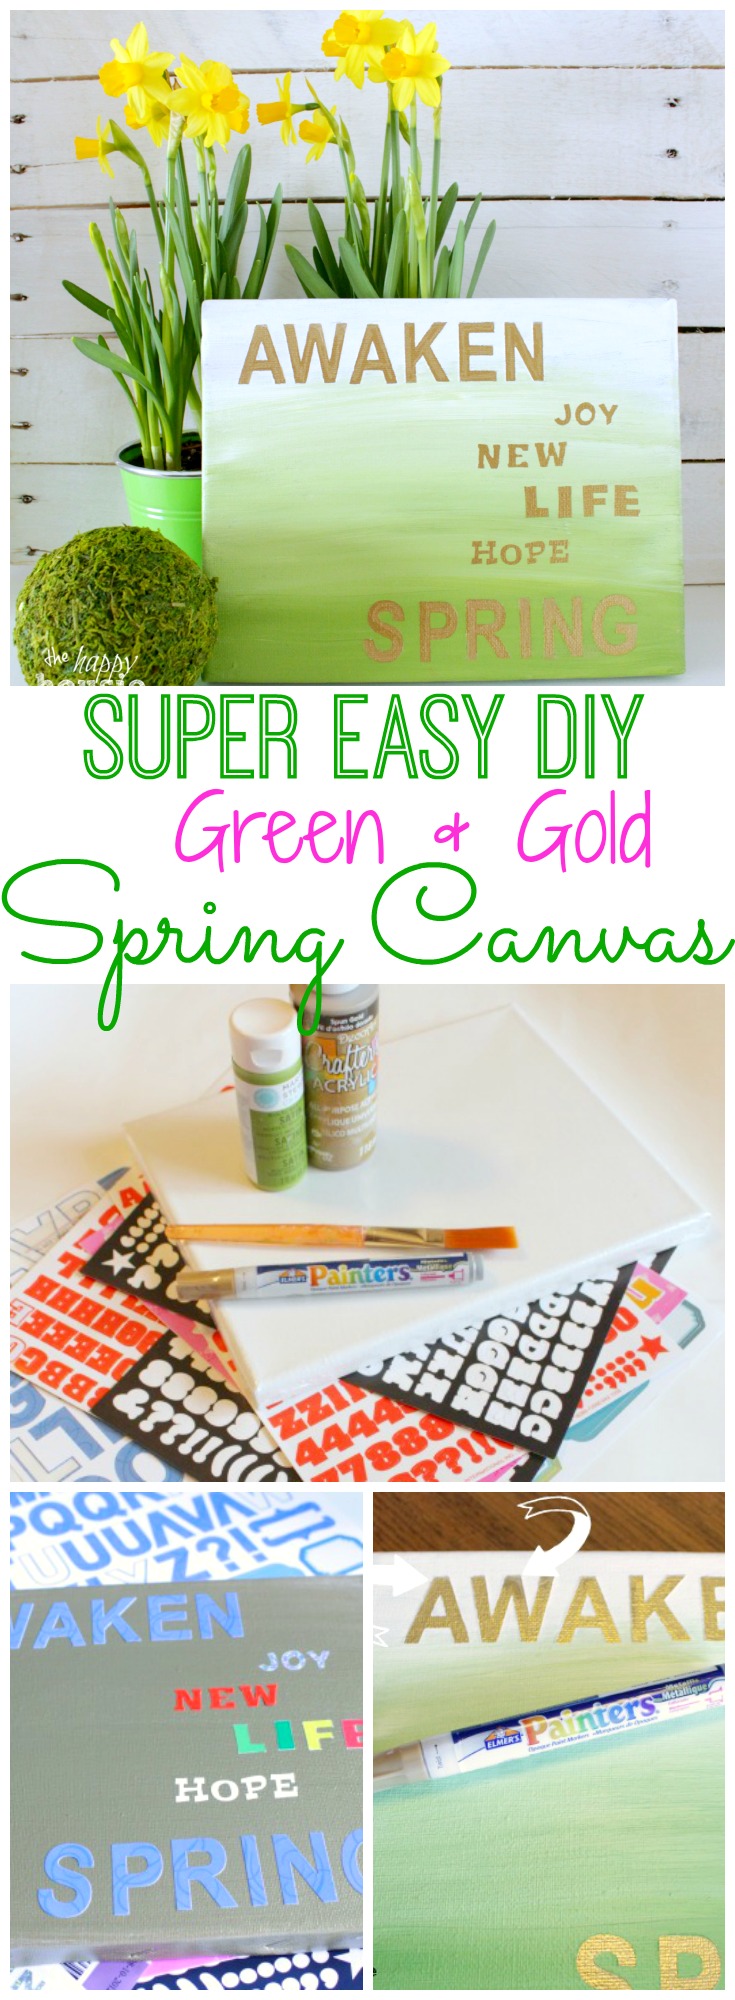 How to make a Super Easy DIY Green and Gold Spring Canvas.